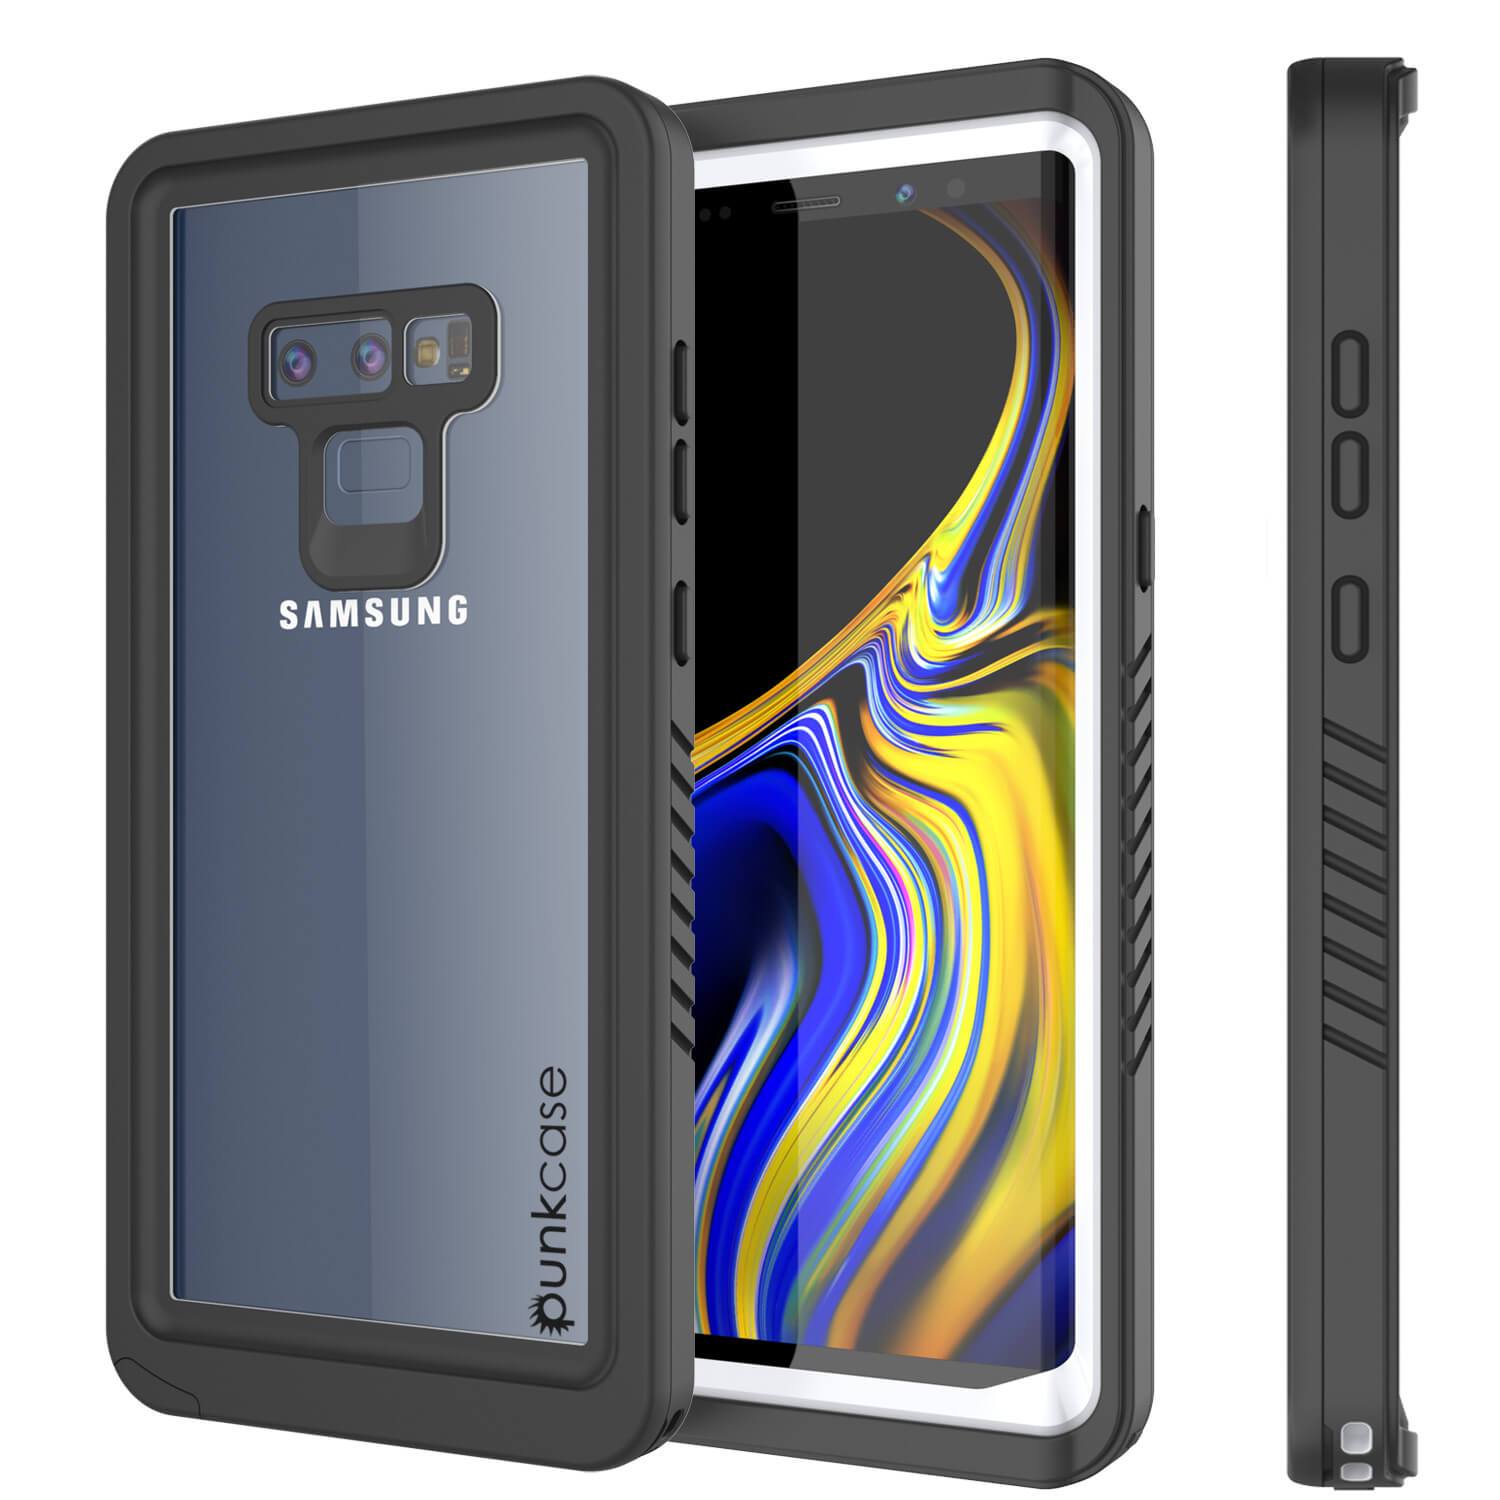 Galaxy Note 9 Case, Punkcase [Extreme Series] Armor Cover W/ Built In Screen Protector [White]